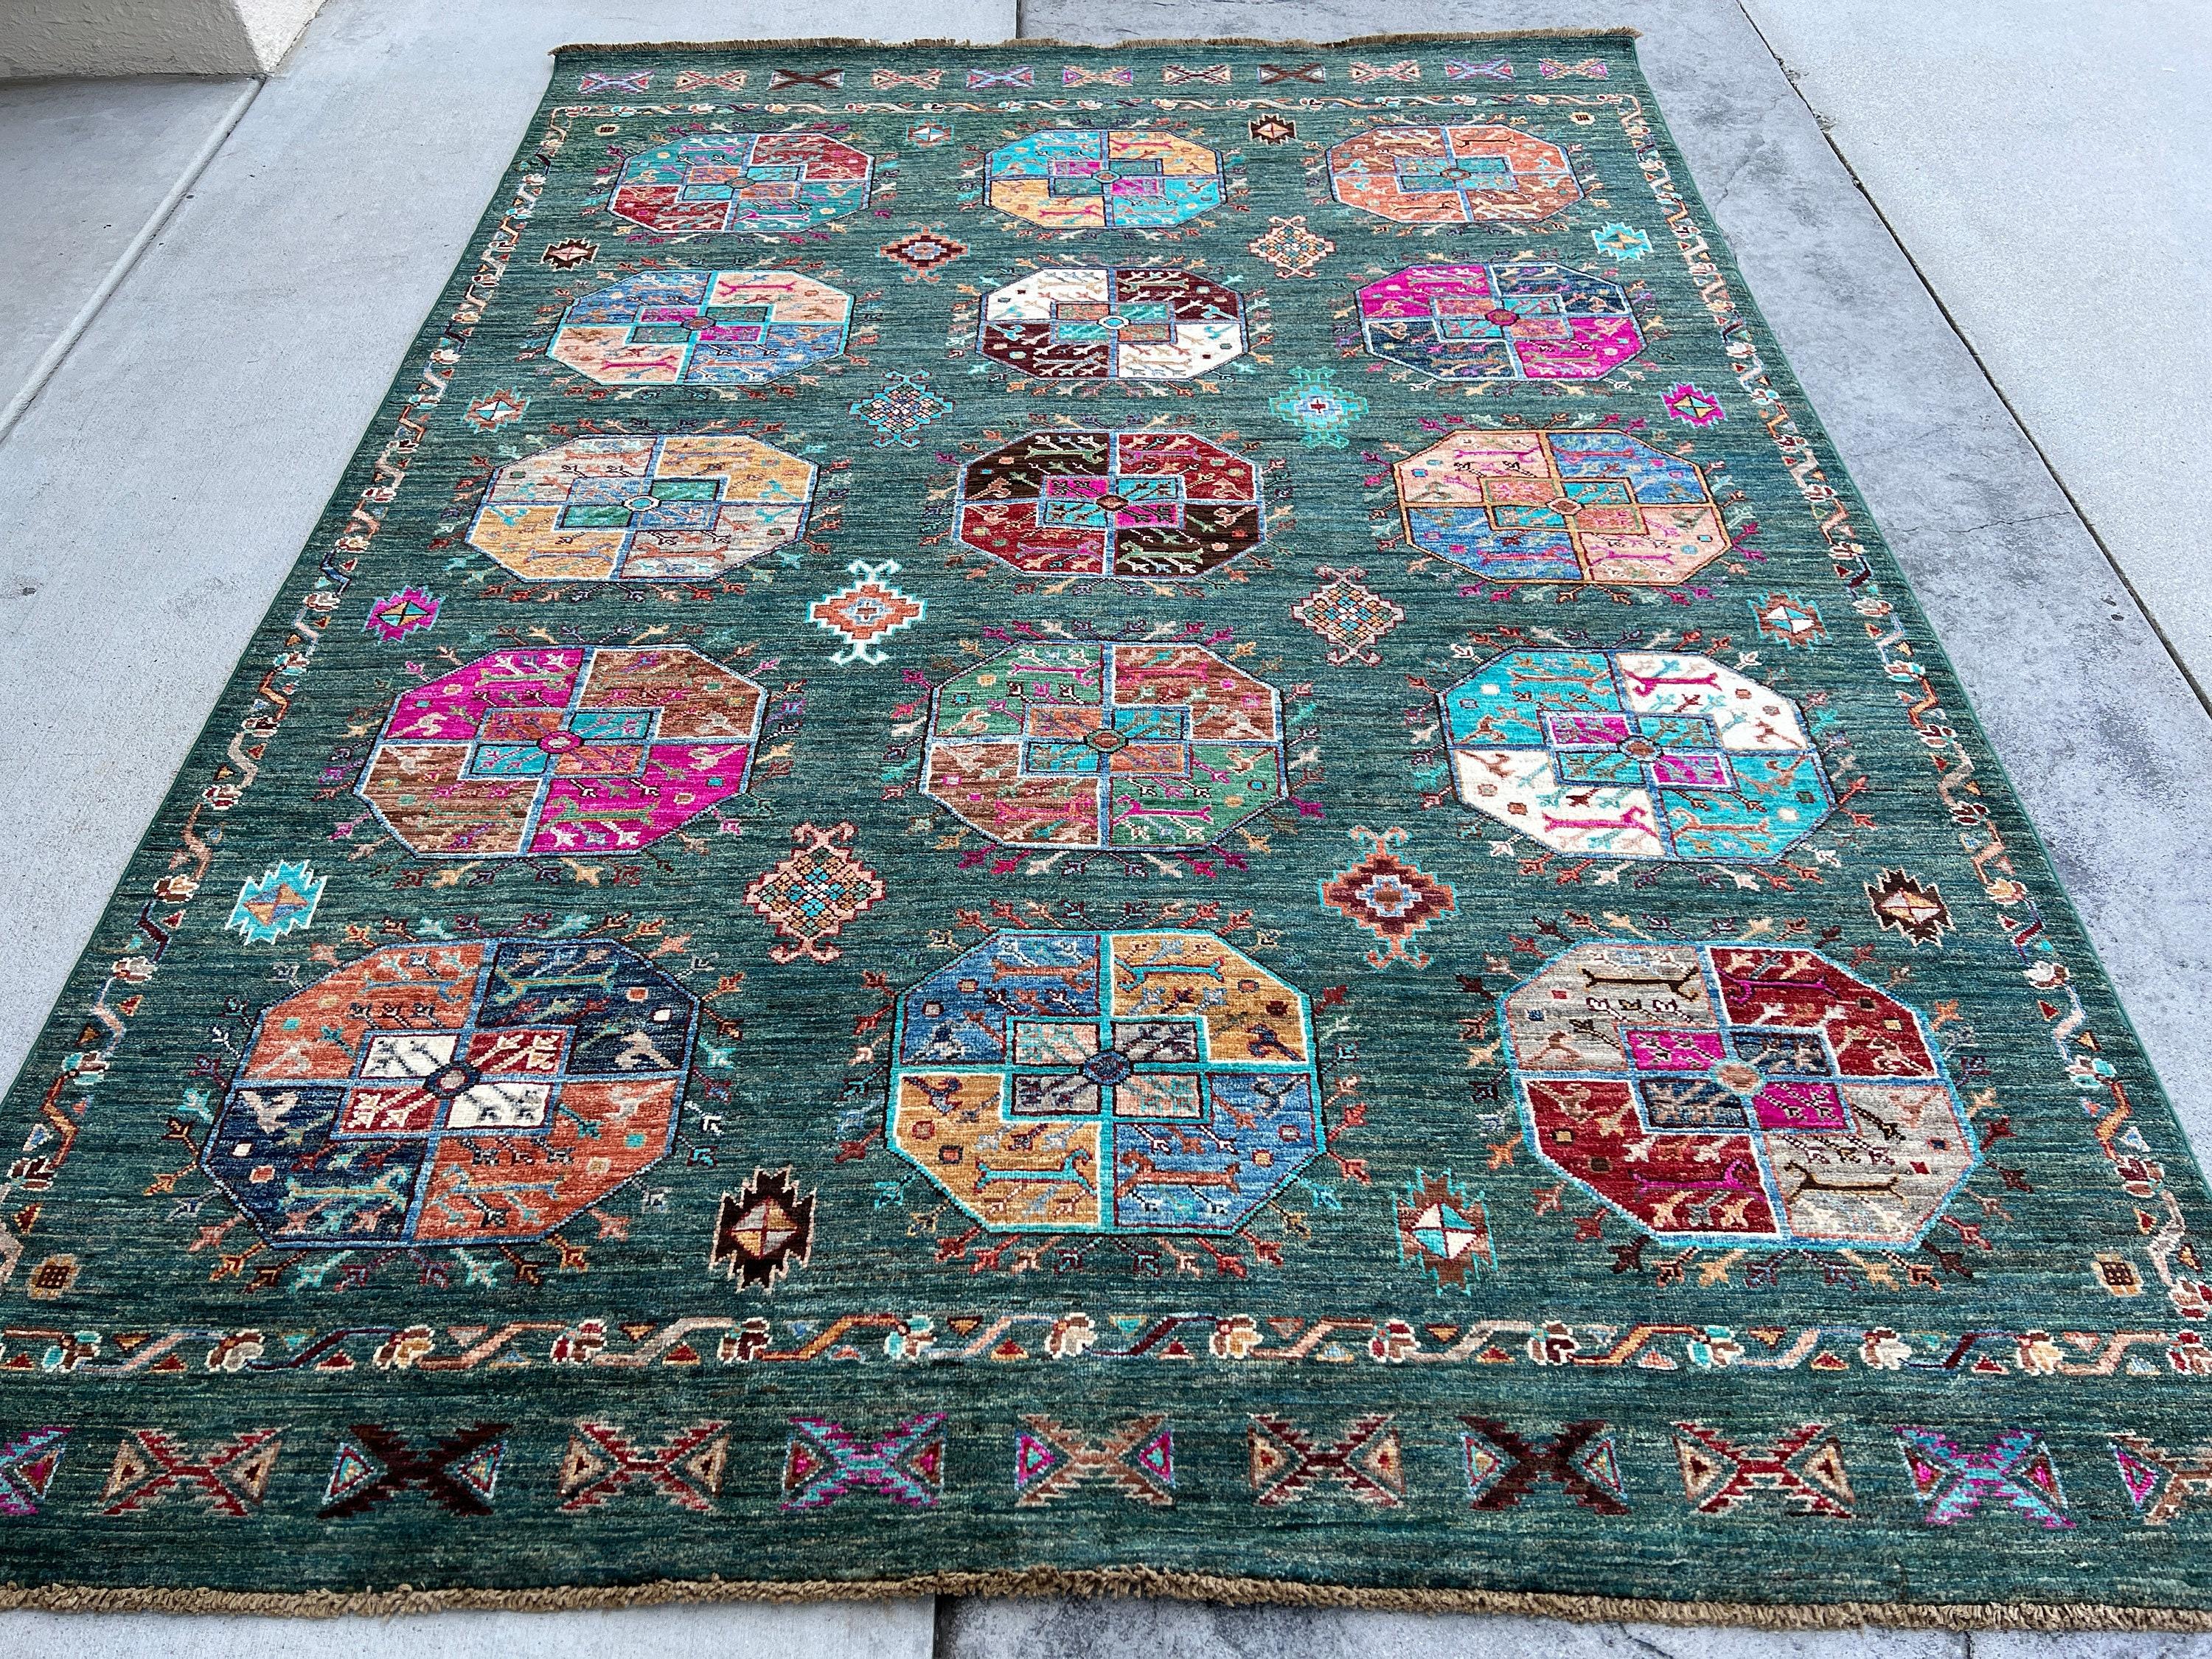 5x7 Hand-Knotted Afghan Rug Premium Hand-Spun Afghan Wool Fair Trade In New Condition For Sale In San Marcos, CA